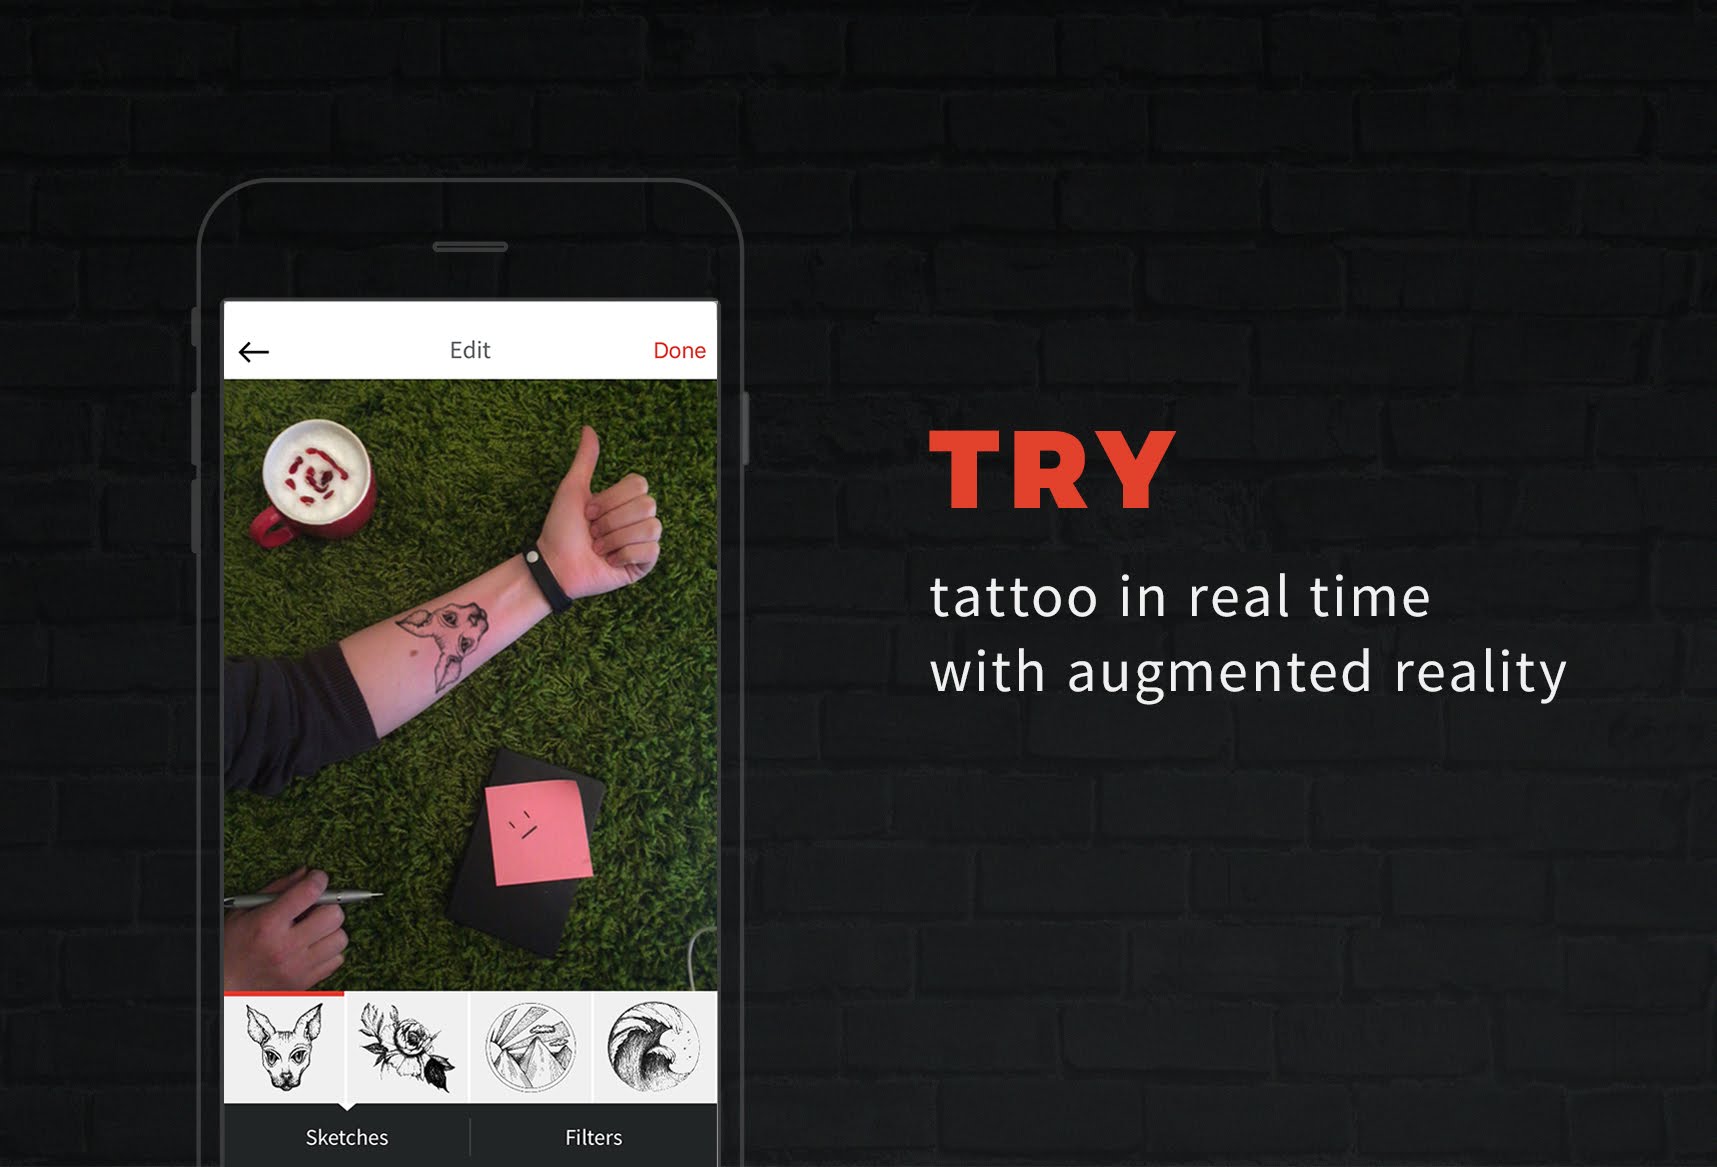 This app lets you test out tattoos before you commit to permanent ink